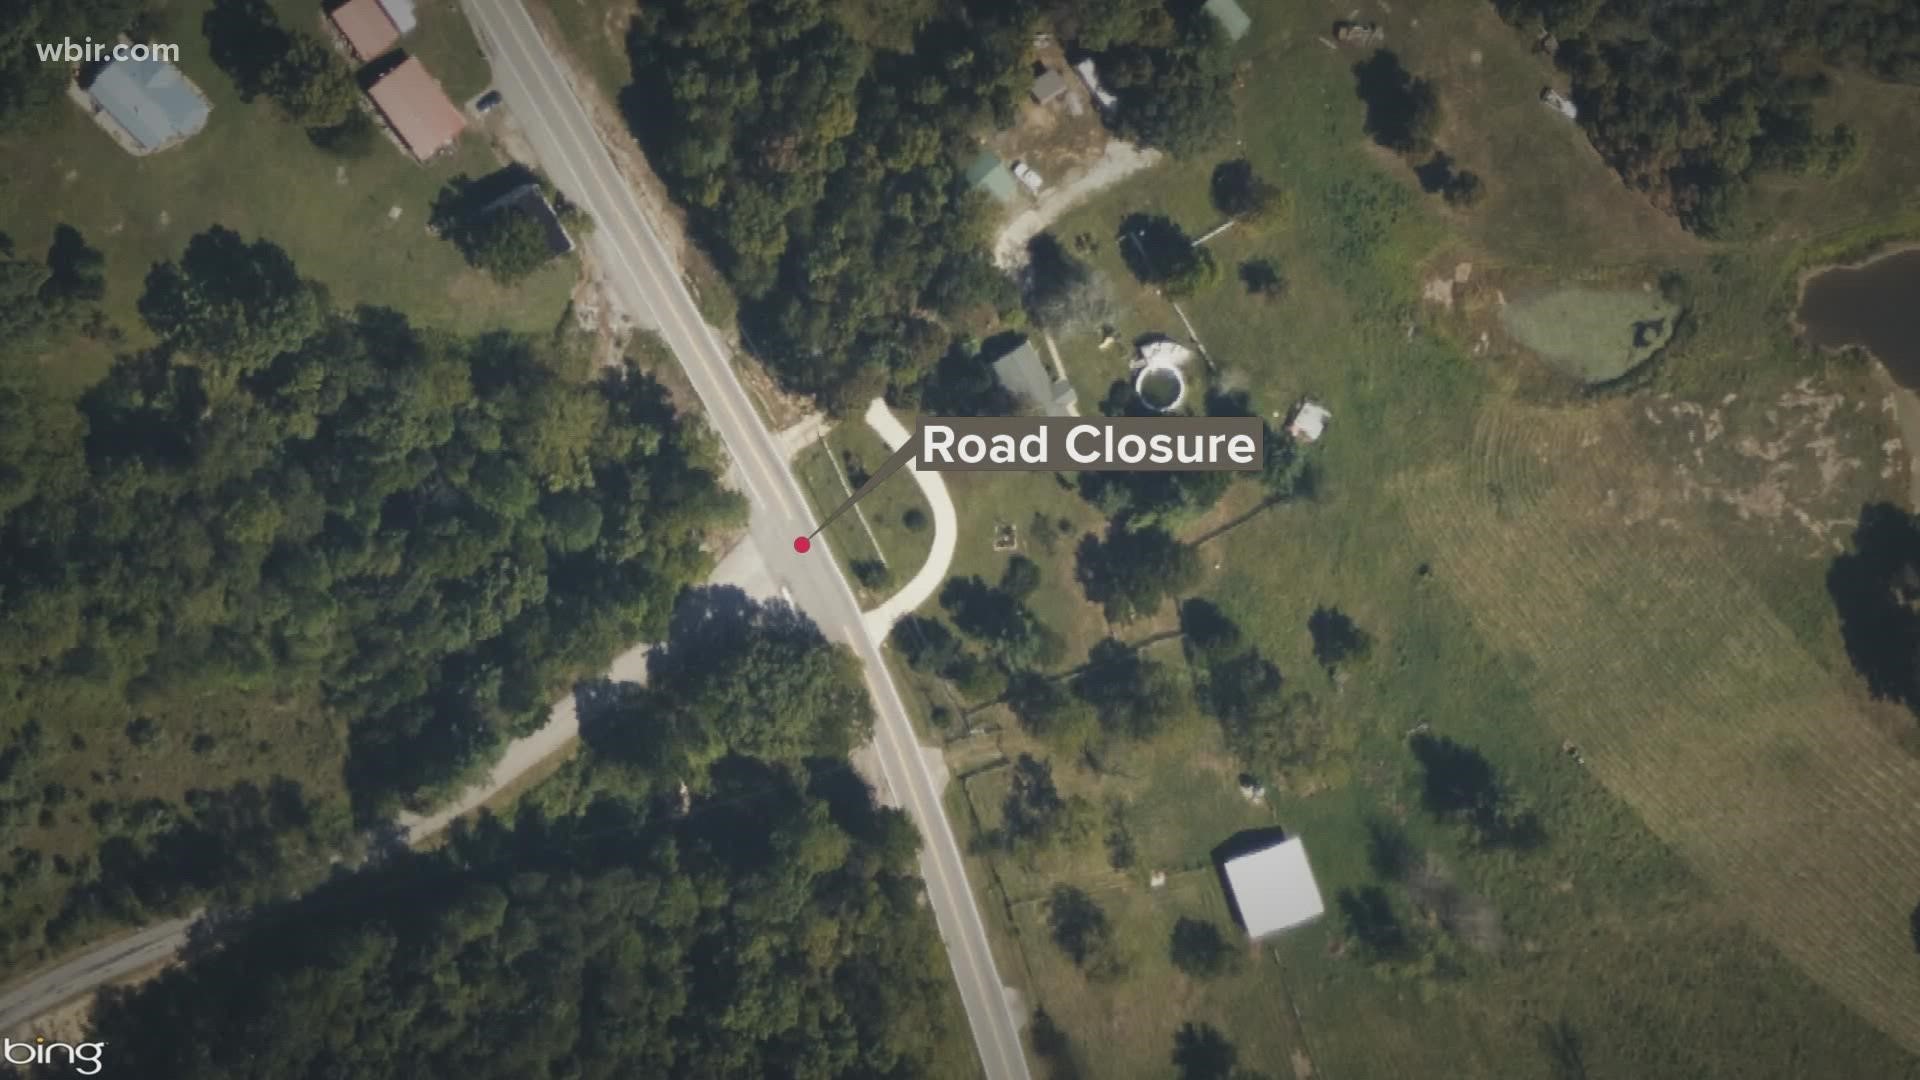 The closure is taking place at the intersection of Island Ford Road and Nashville Highway.